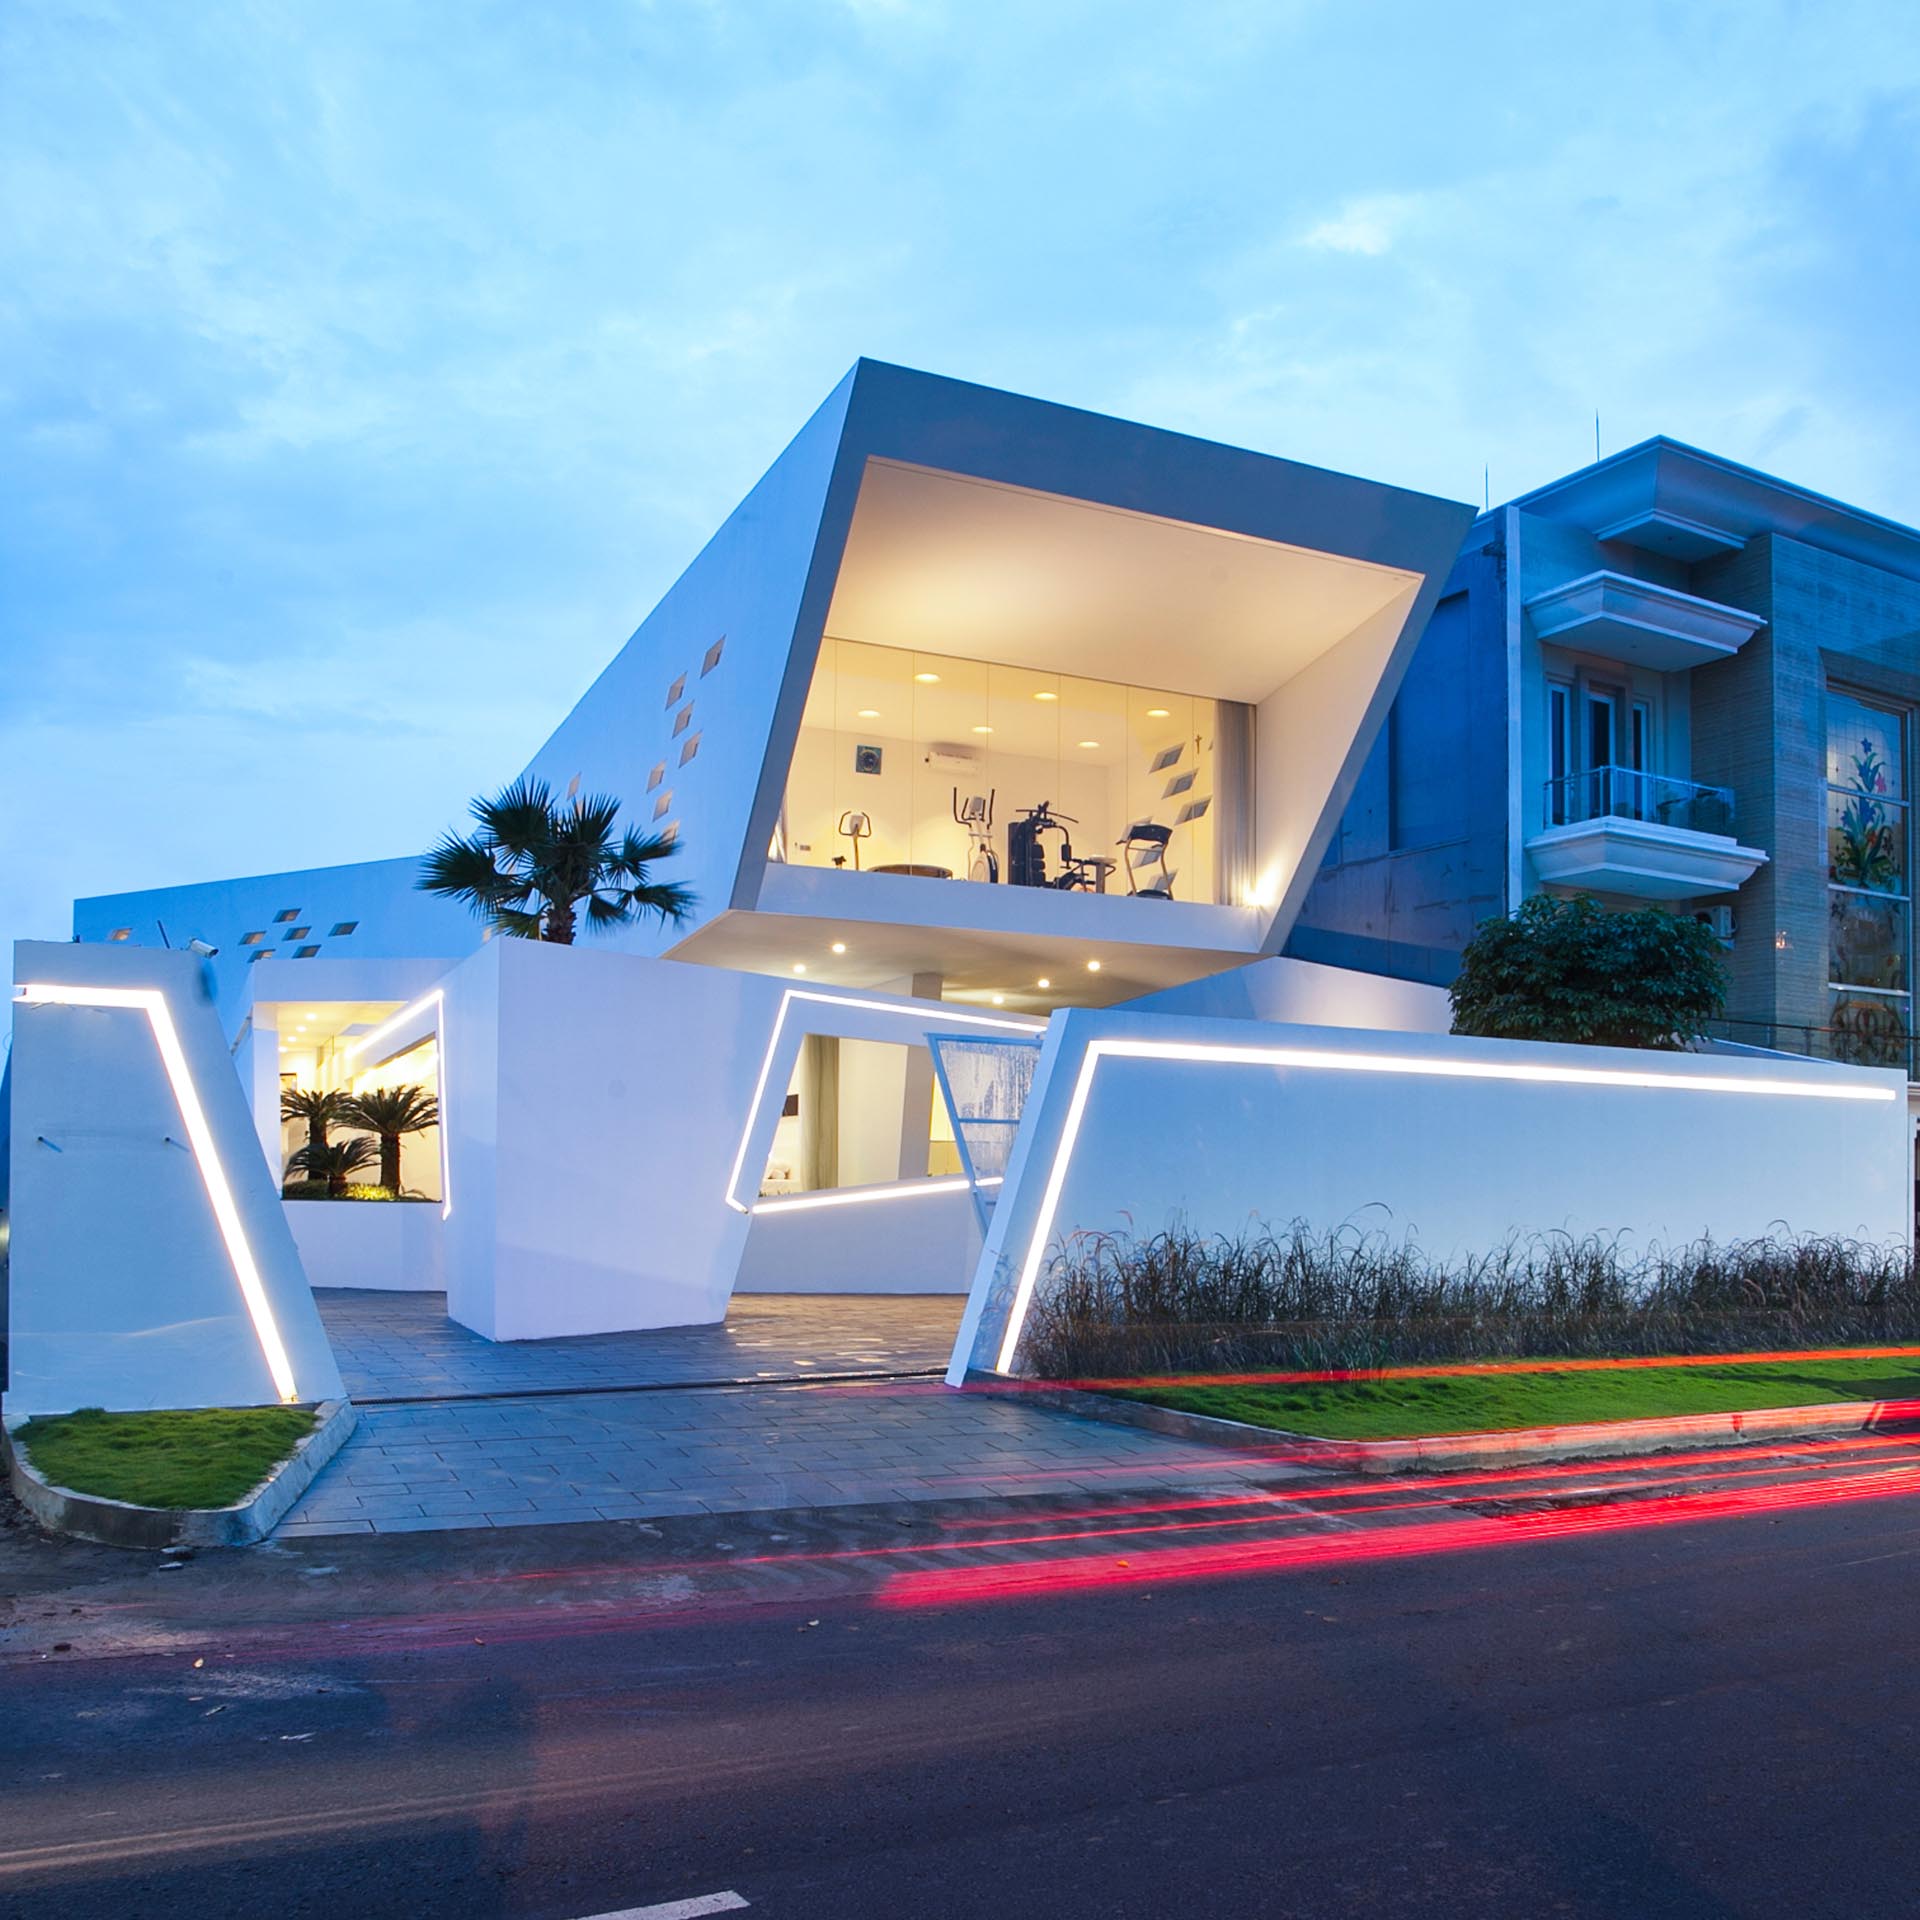 A modern house design with lighting built into the front fence and walls.